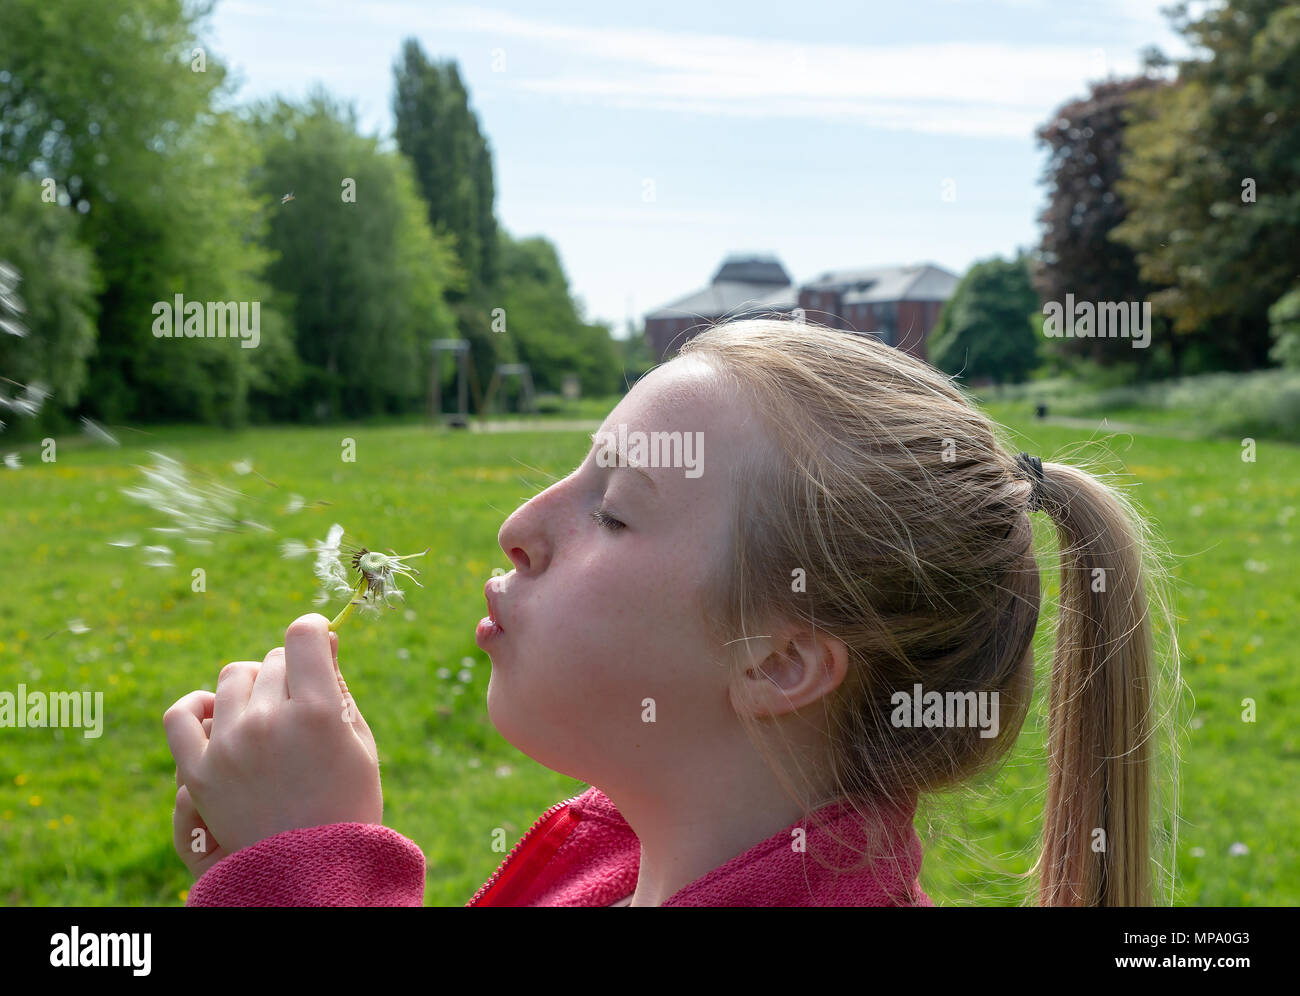 Young girl with blond hair and a pony tail blows the seeds off a dandelion flower Stock Photo